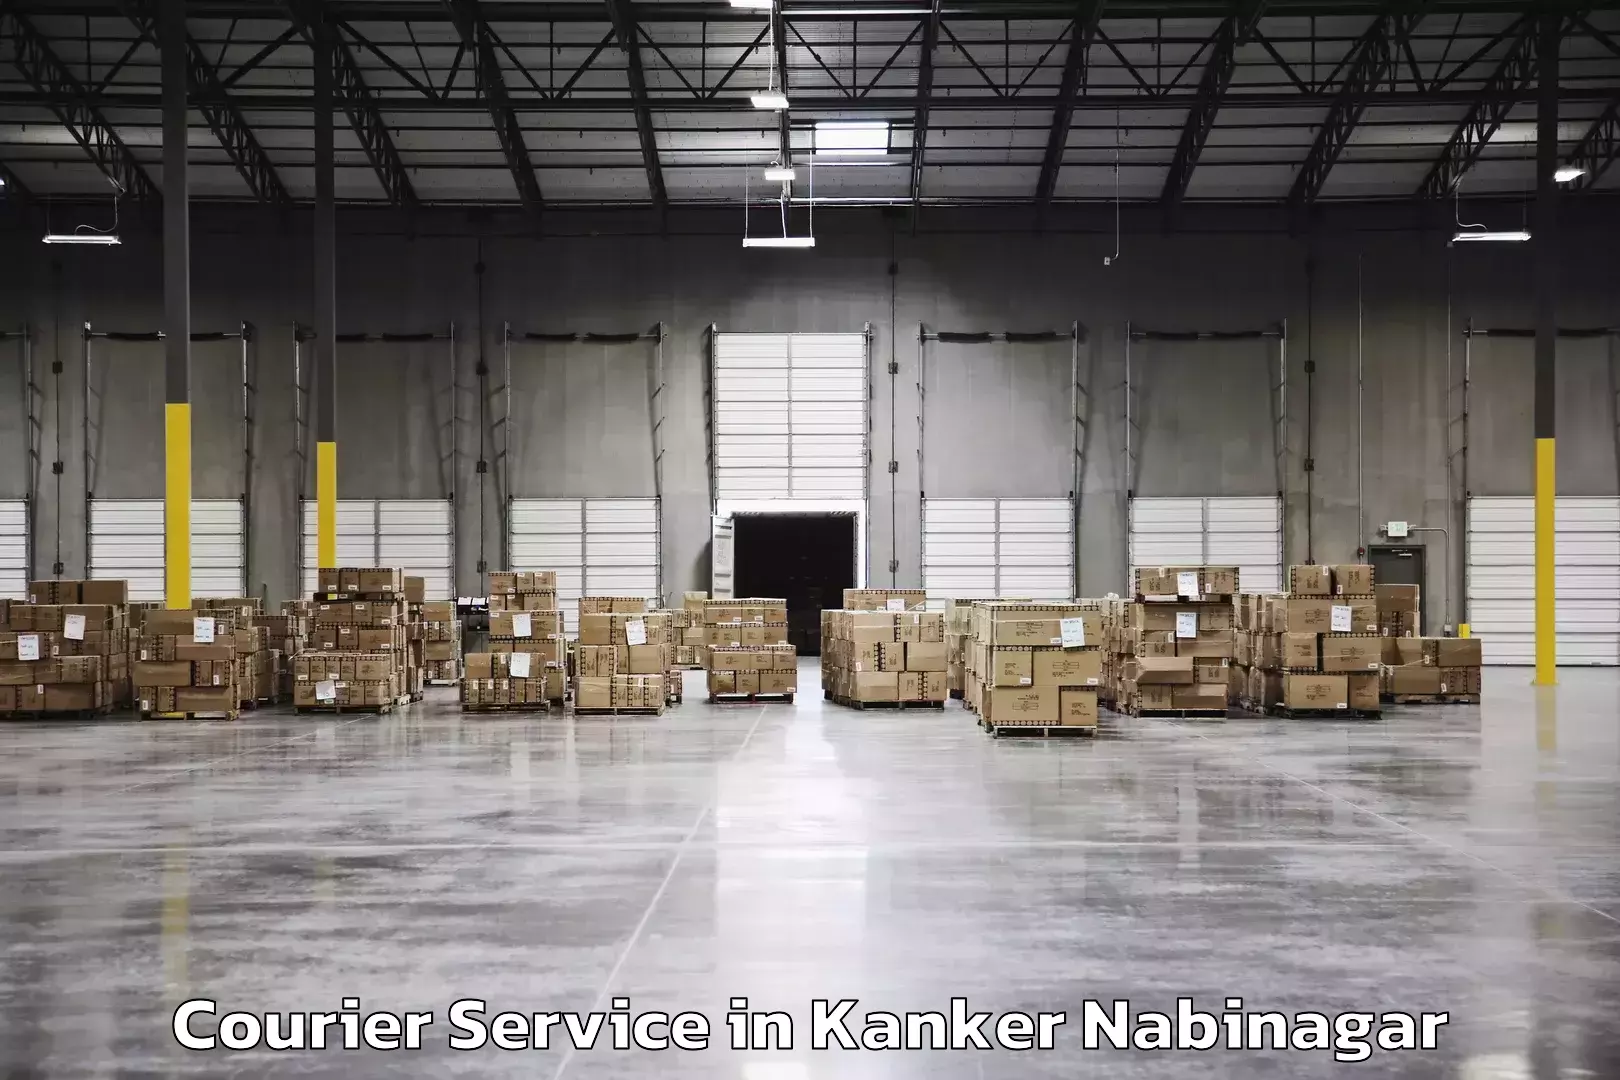 Secure freight services in Kanker Nabinagar